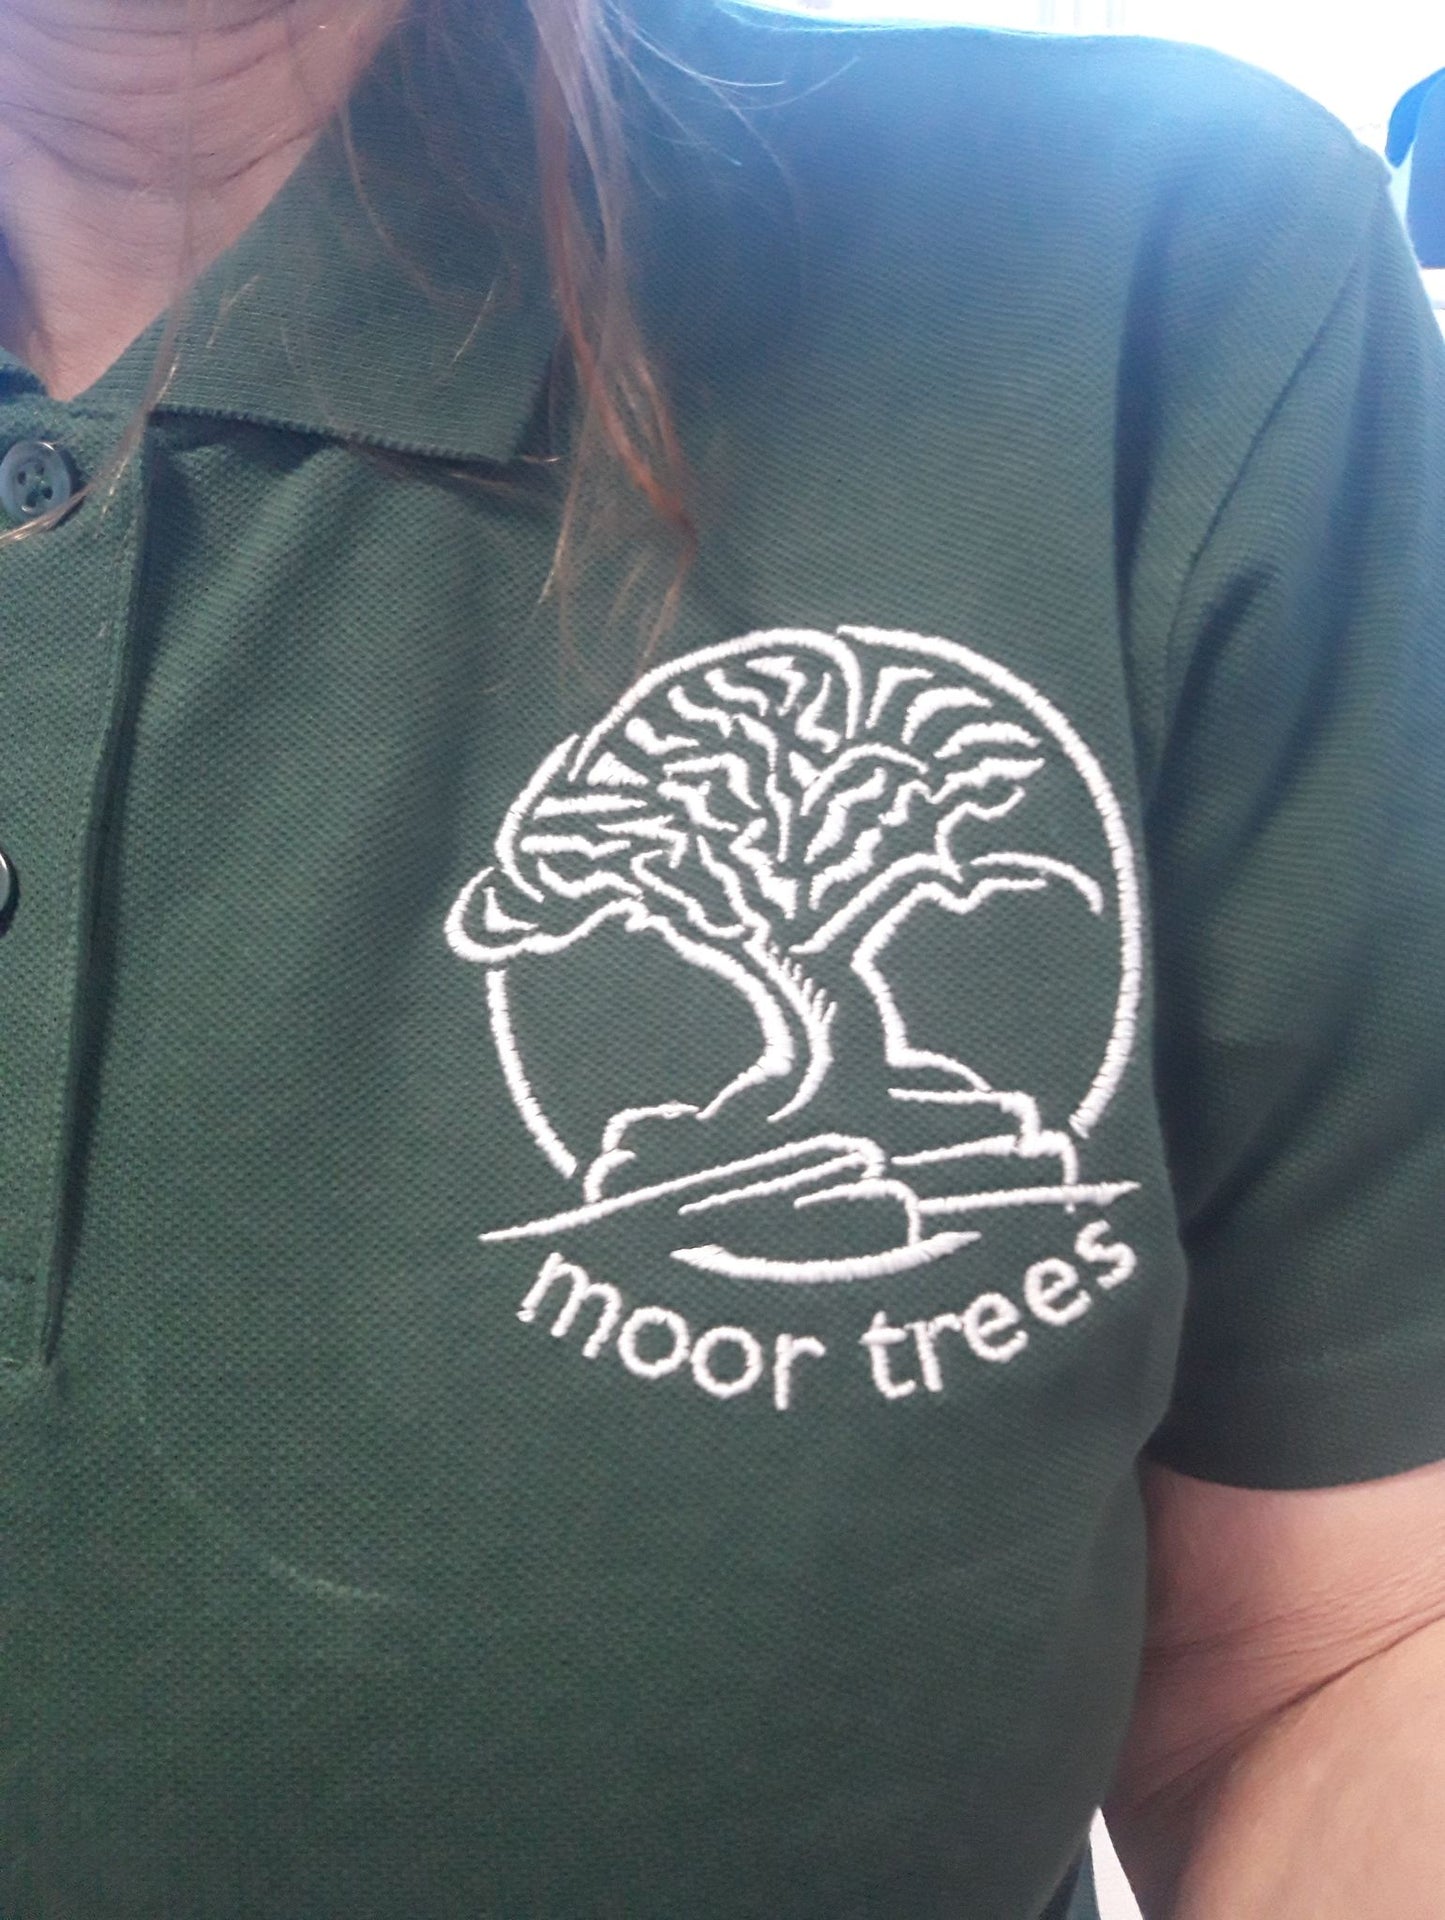 Ladies polo shirt with embroidered Moor Trees logo